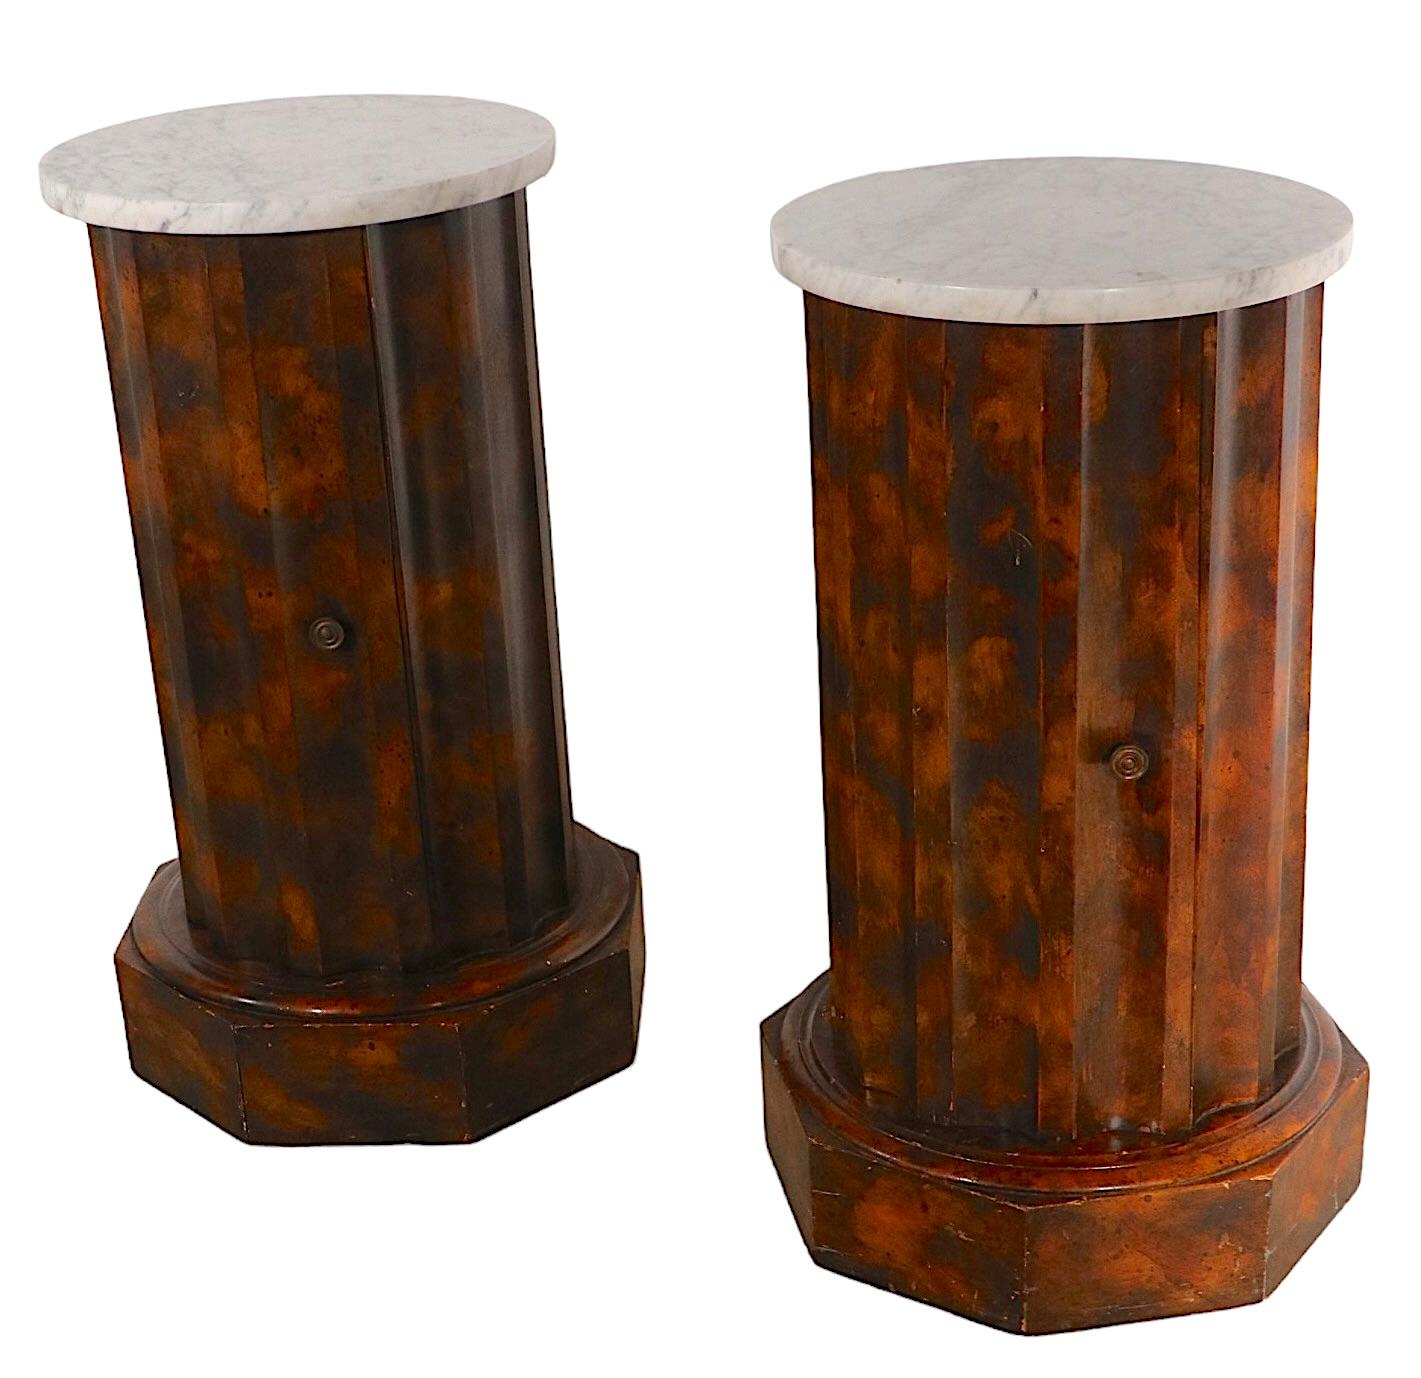 Neoclassical Revival Pr. Decorative Marble Top Half Column Pedestals in Faux Tortoise Shell Finish For Sale